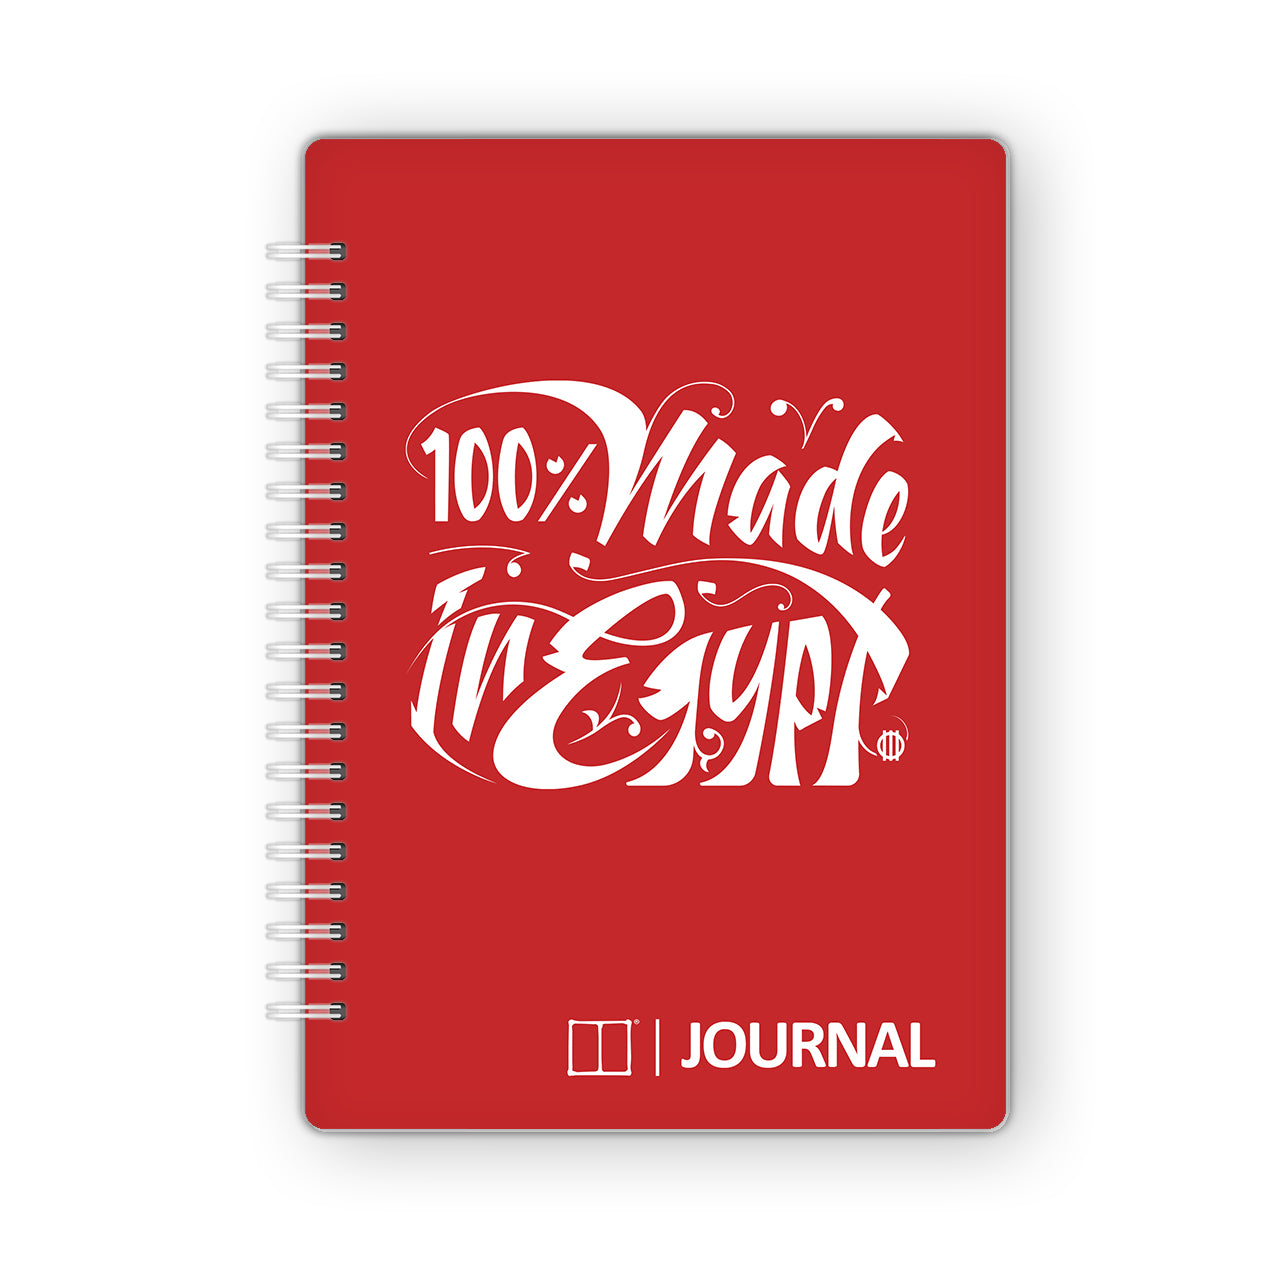 Journal | 20 X 14 cm - Product RED SketchBook Stationery